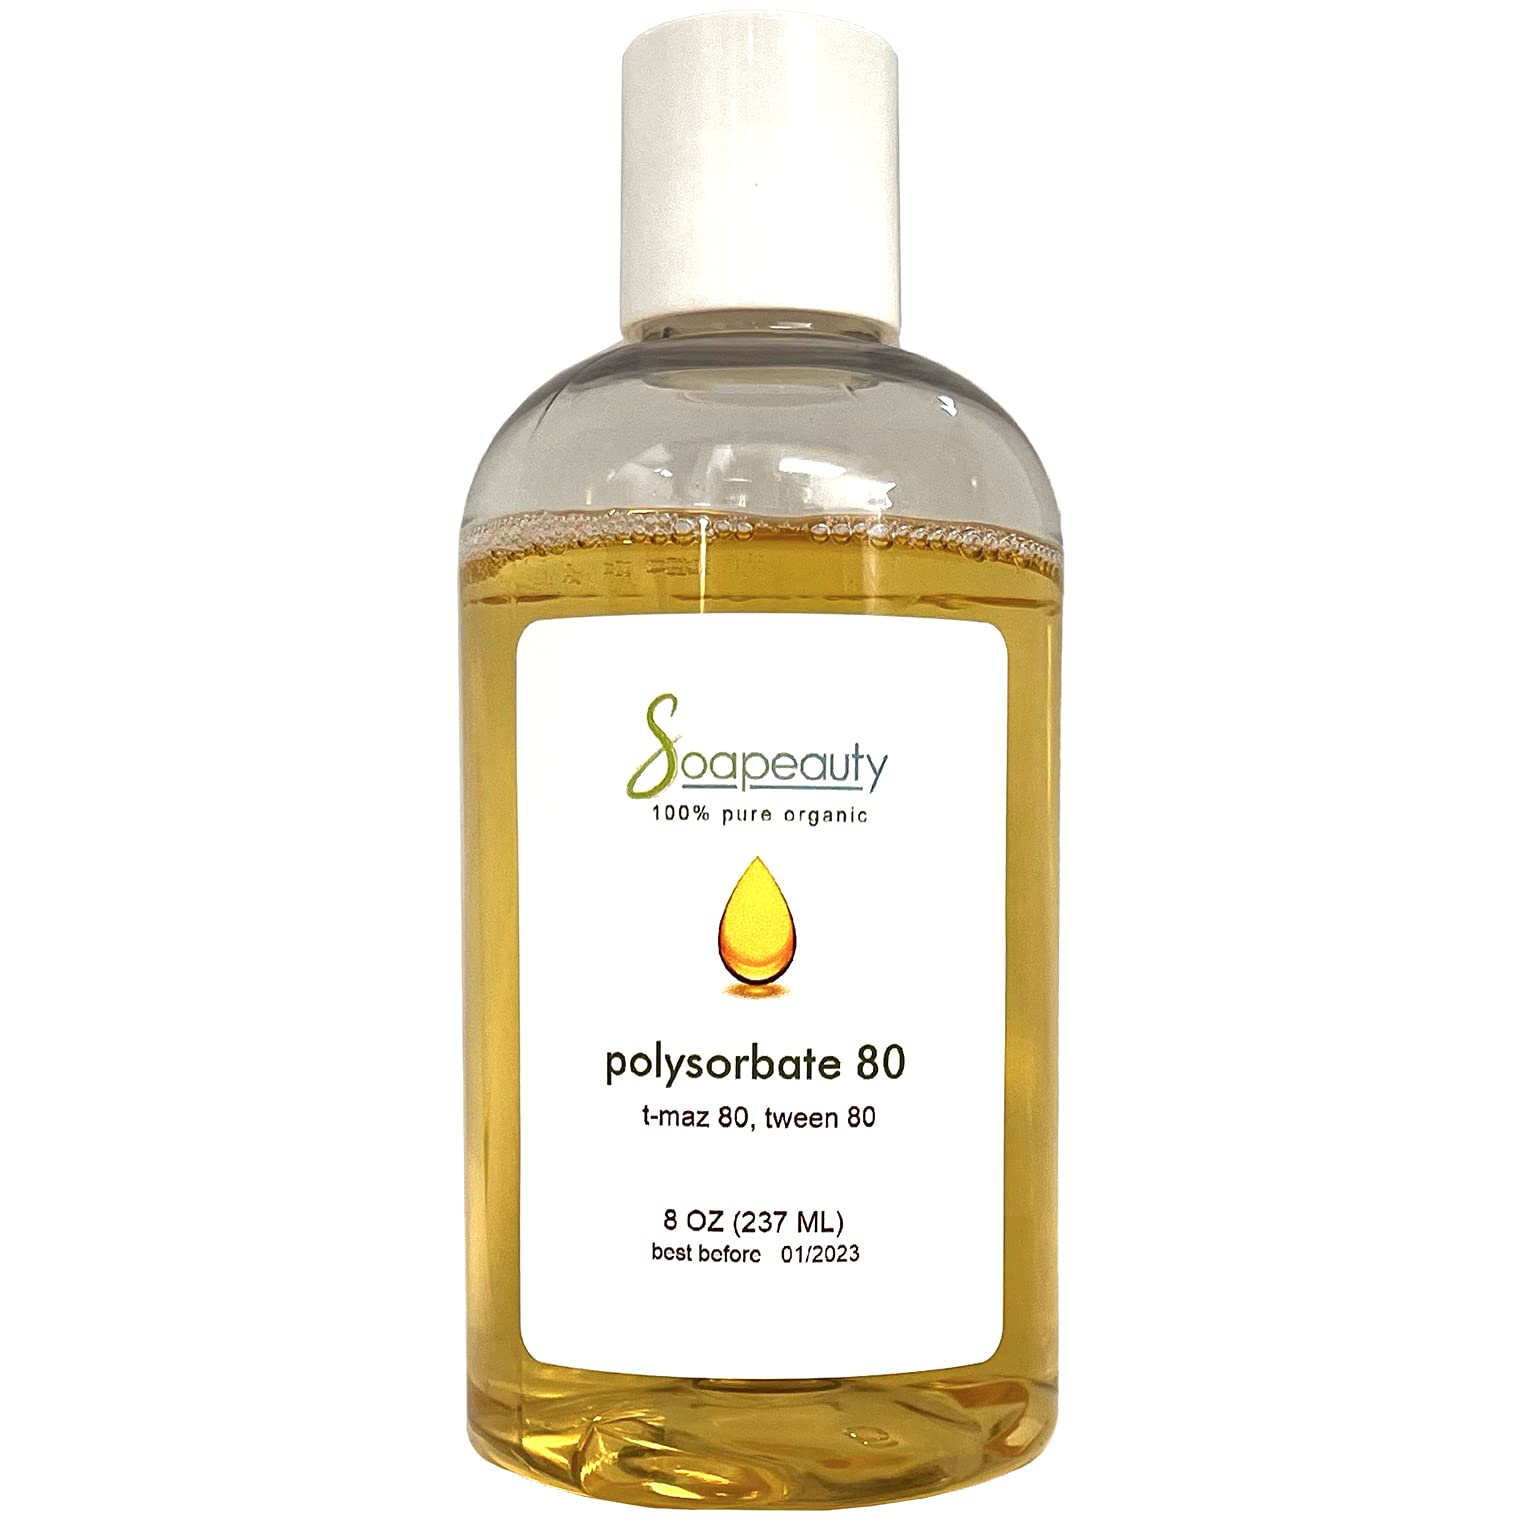 Polysorbate 80 used in skincare to combine oil and water